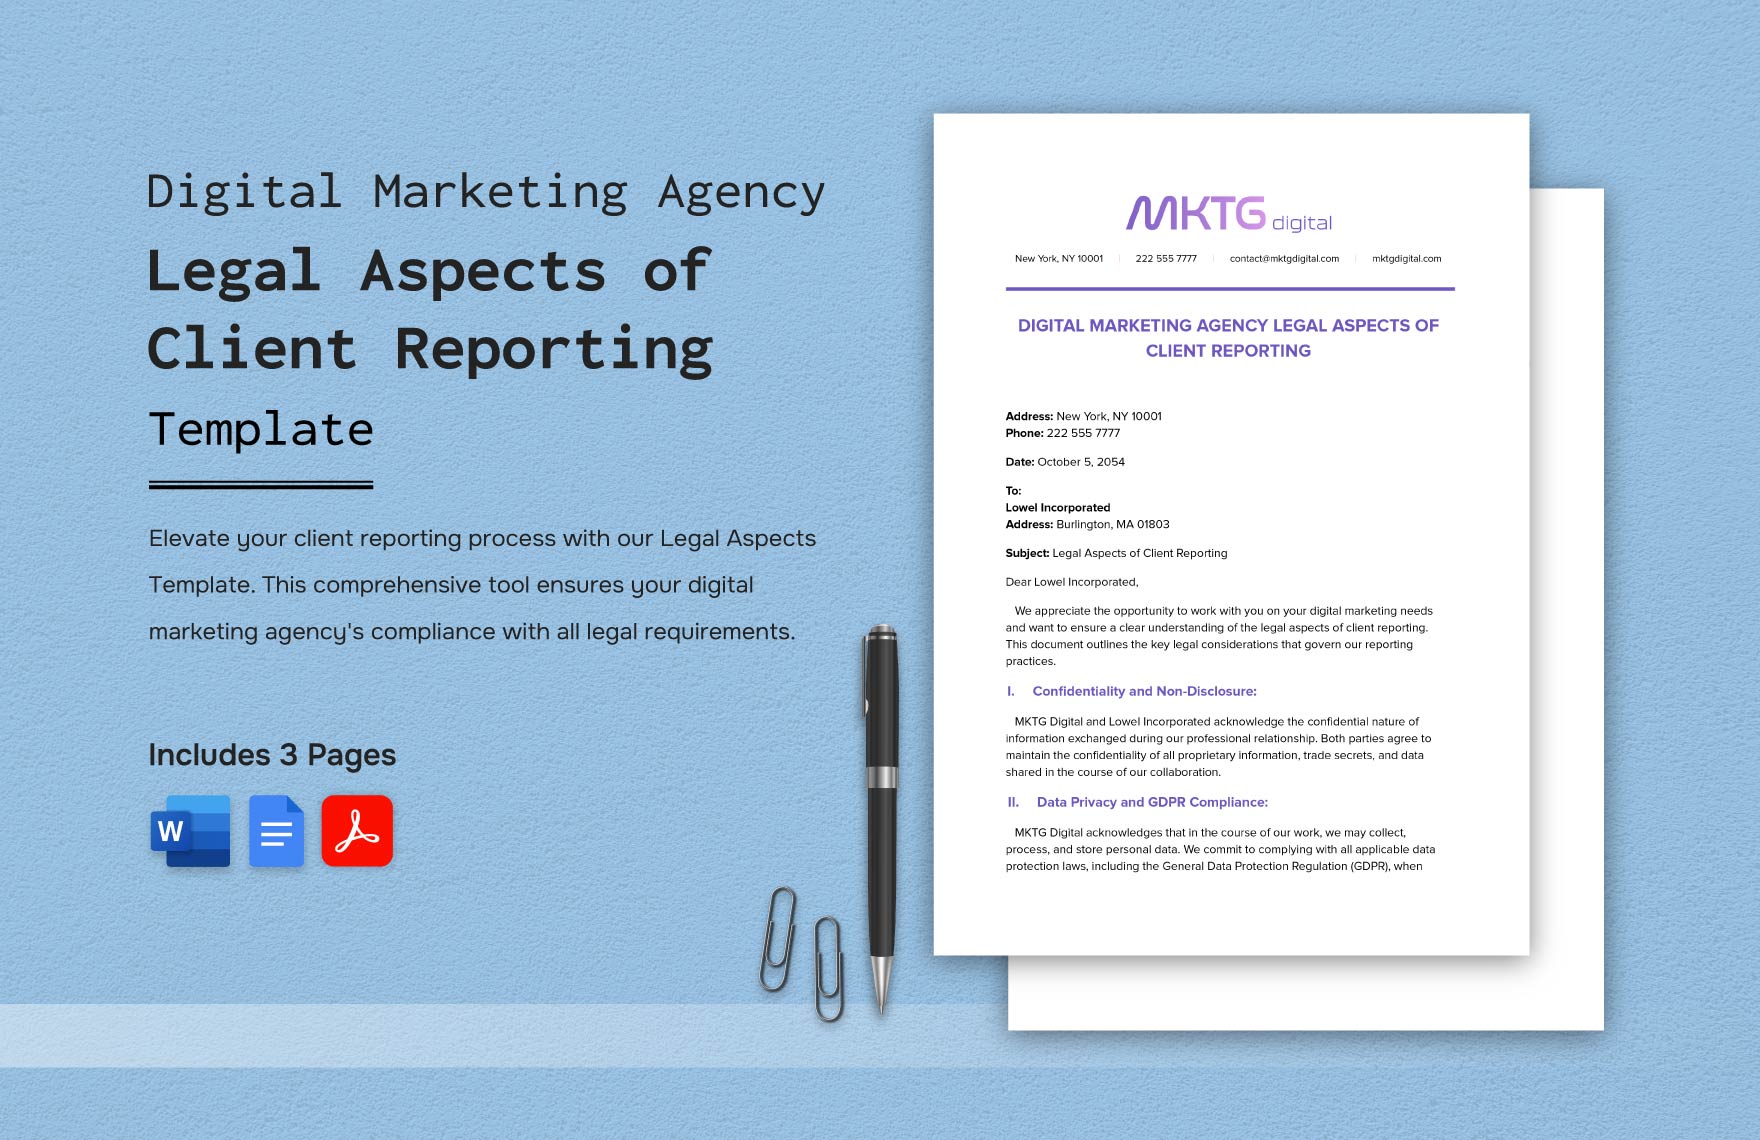 Digital Marketing Agency Legal Aspects of Client Reporting Template in Word, Google Docs, PDF